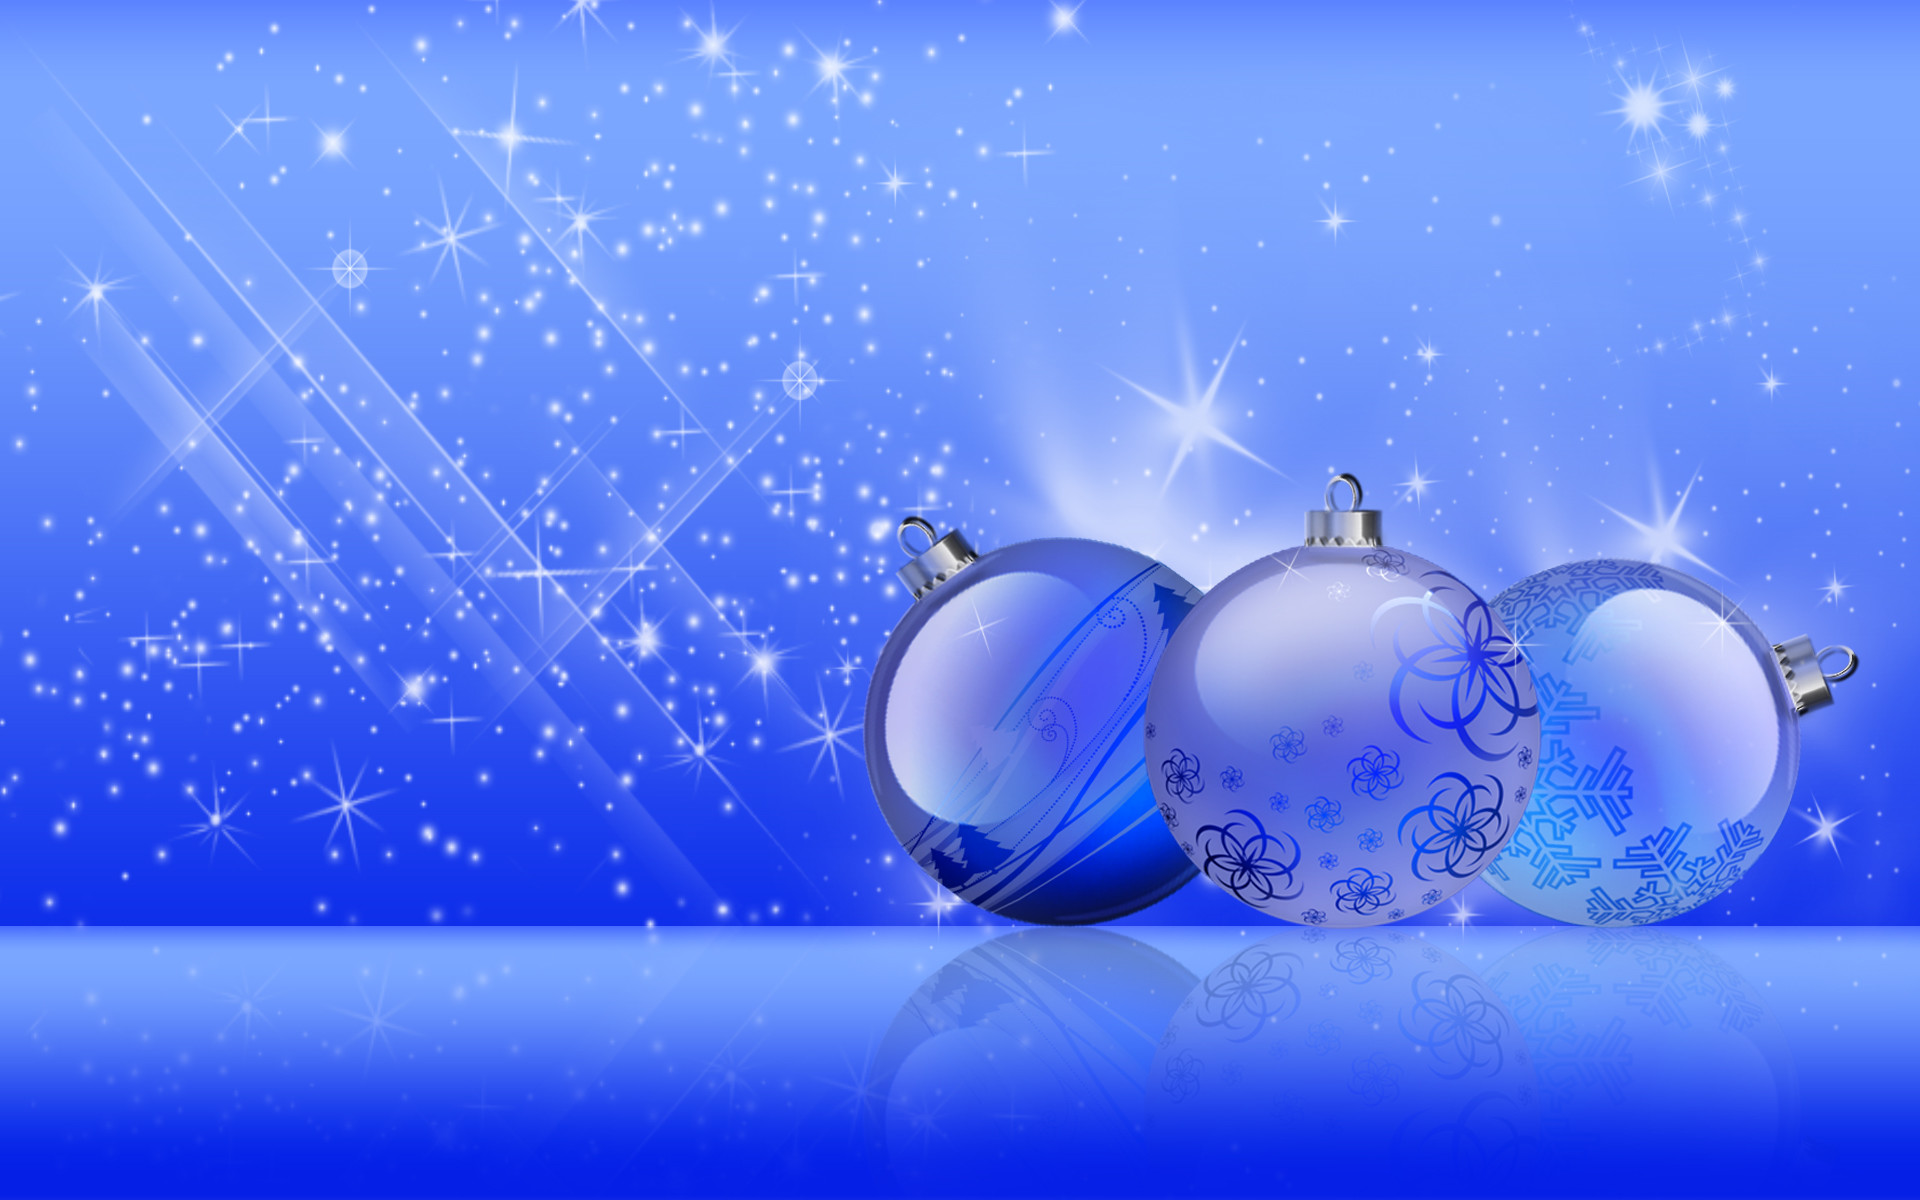 1920x1200 xmas wallpaper hd 1360x768 - photo #11. Visited 250 times, 1 visits today)